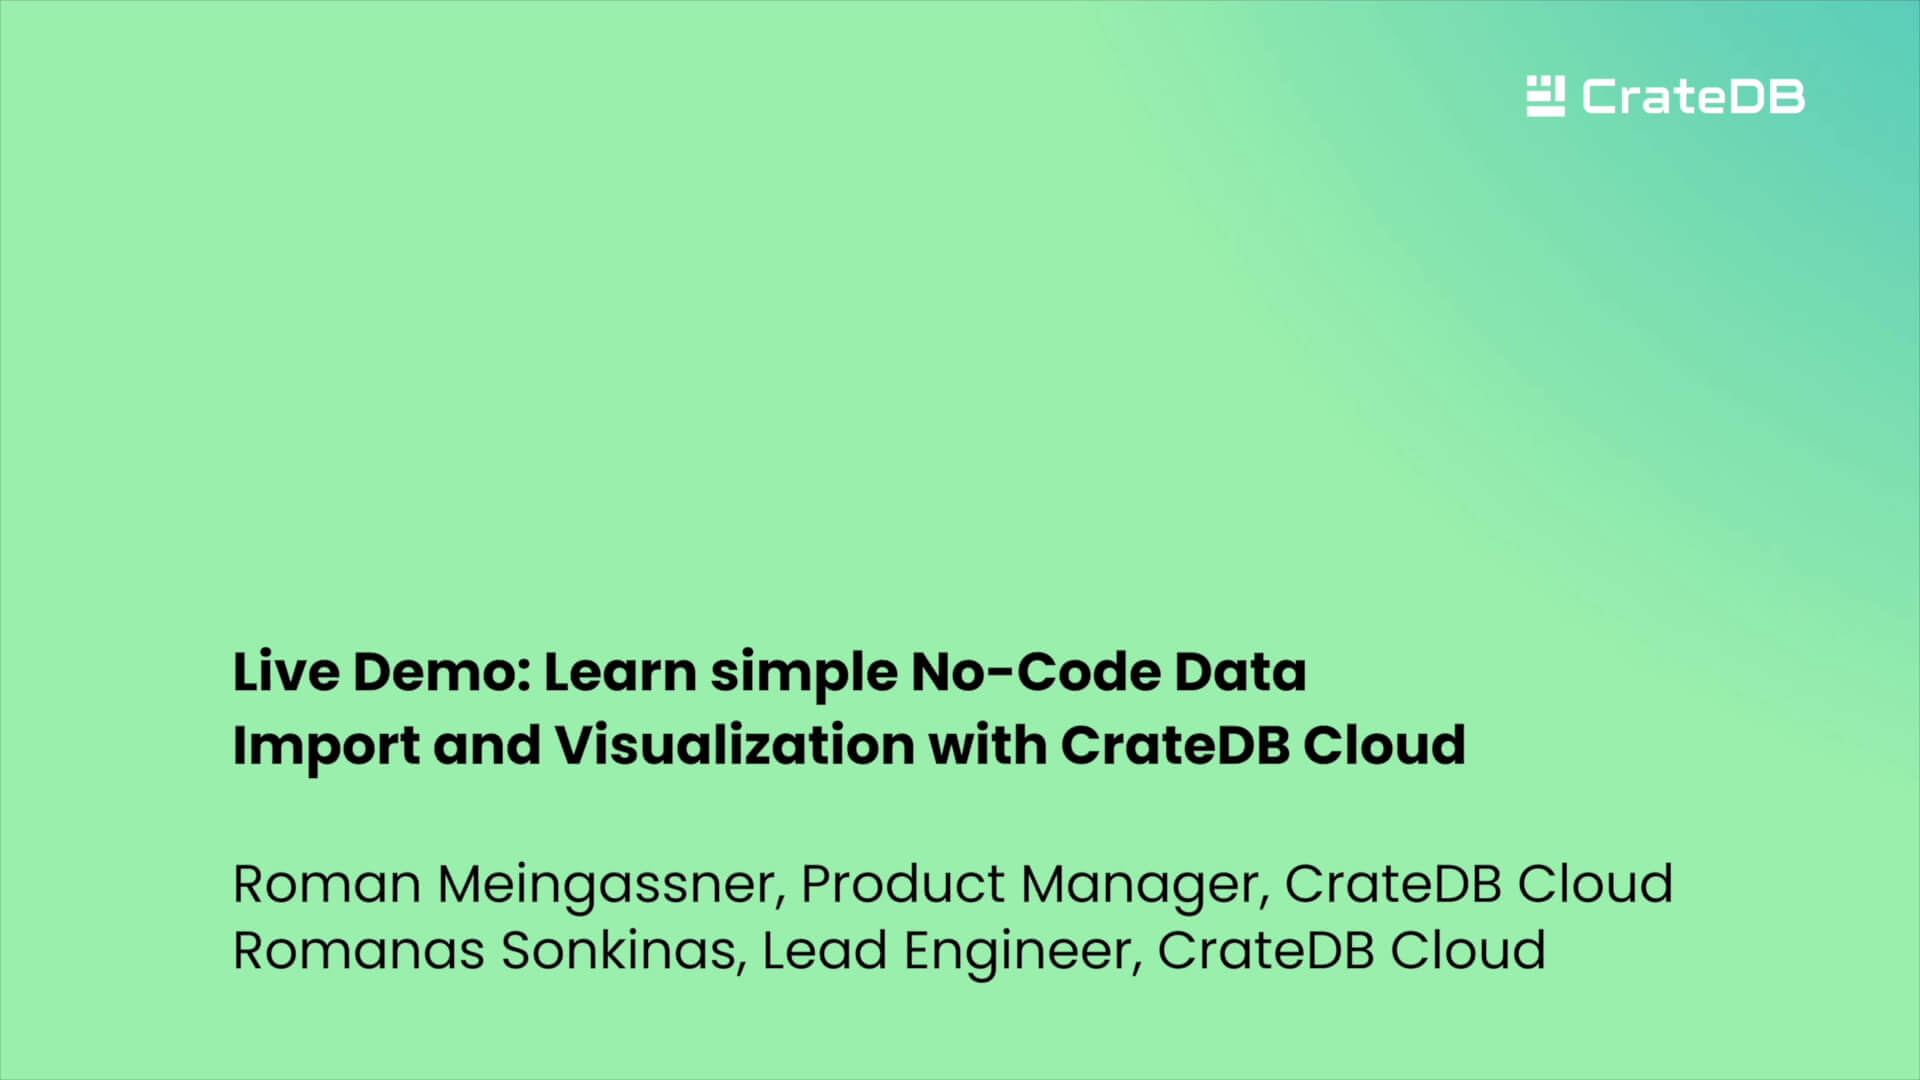 Learn simple No-Code Data Import and Visualization with CrateDB Cloud